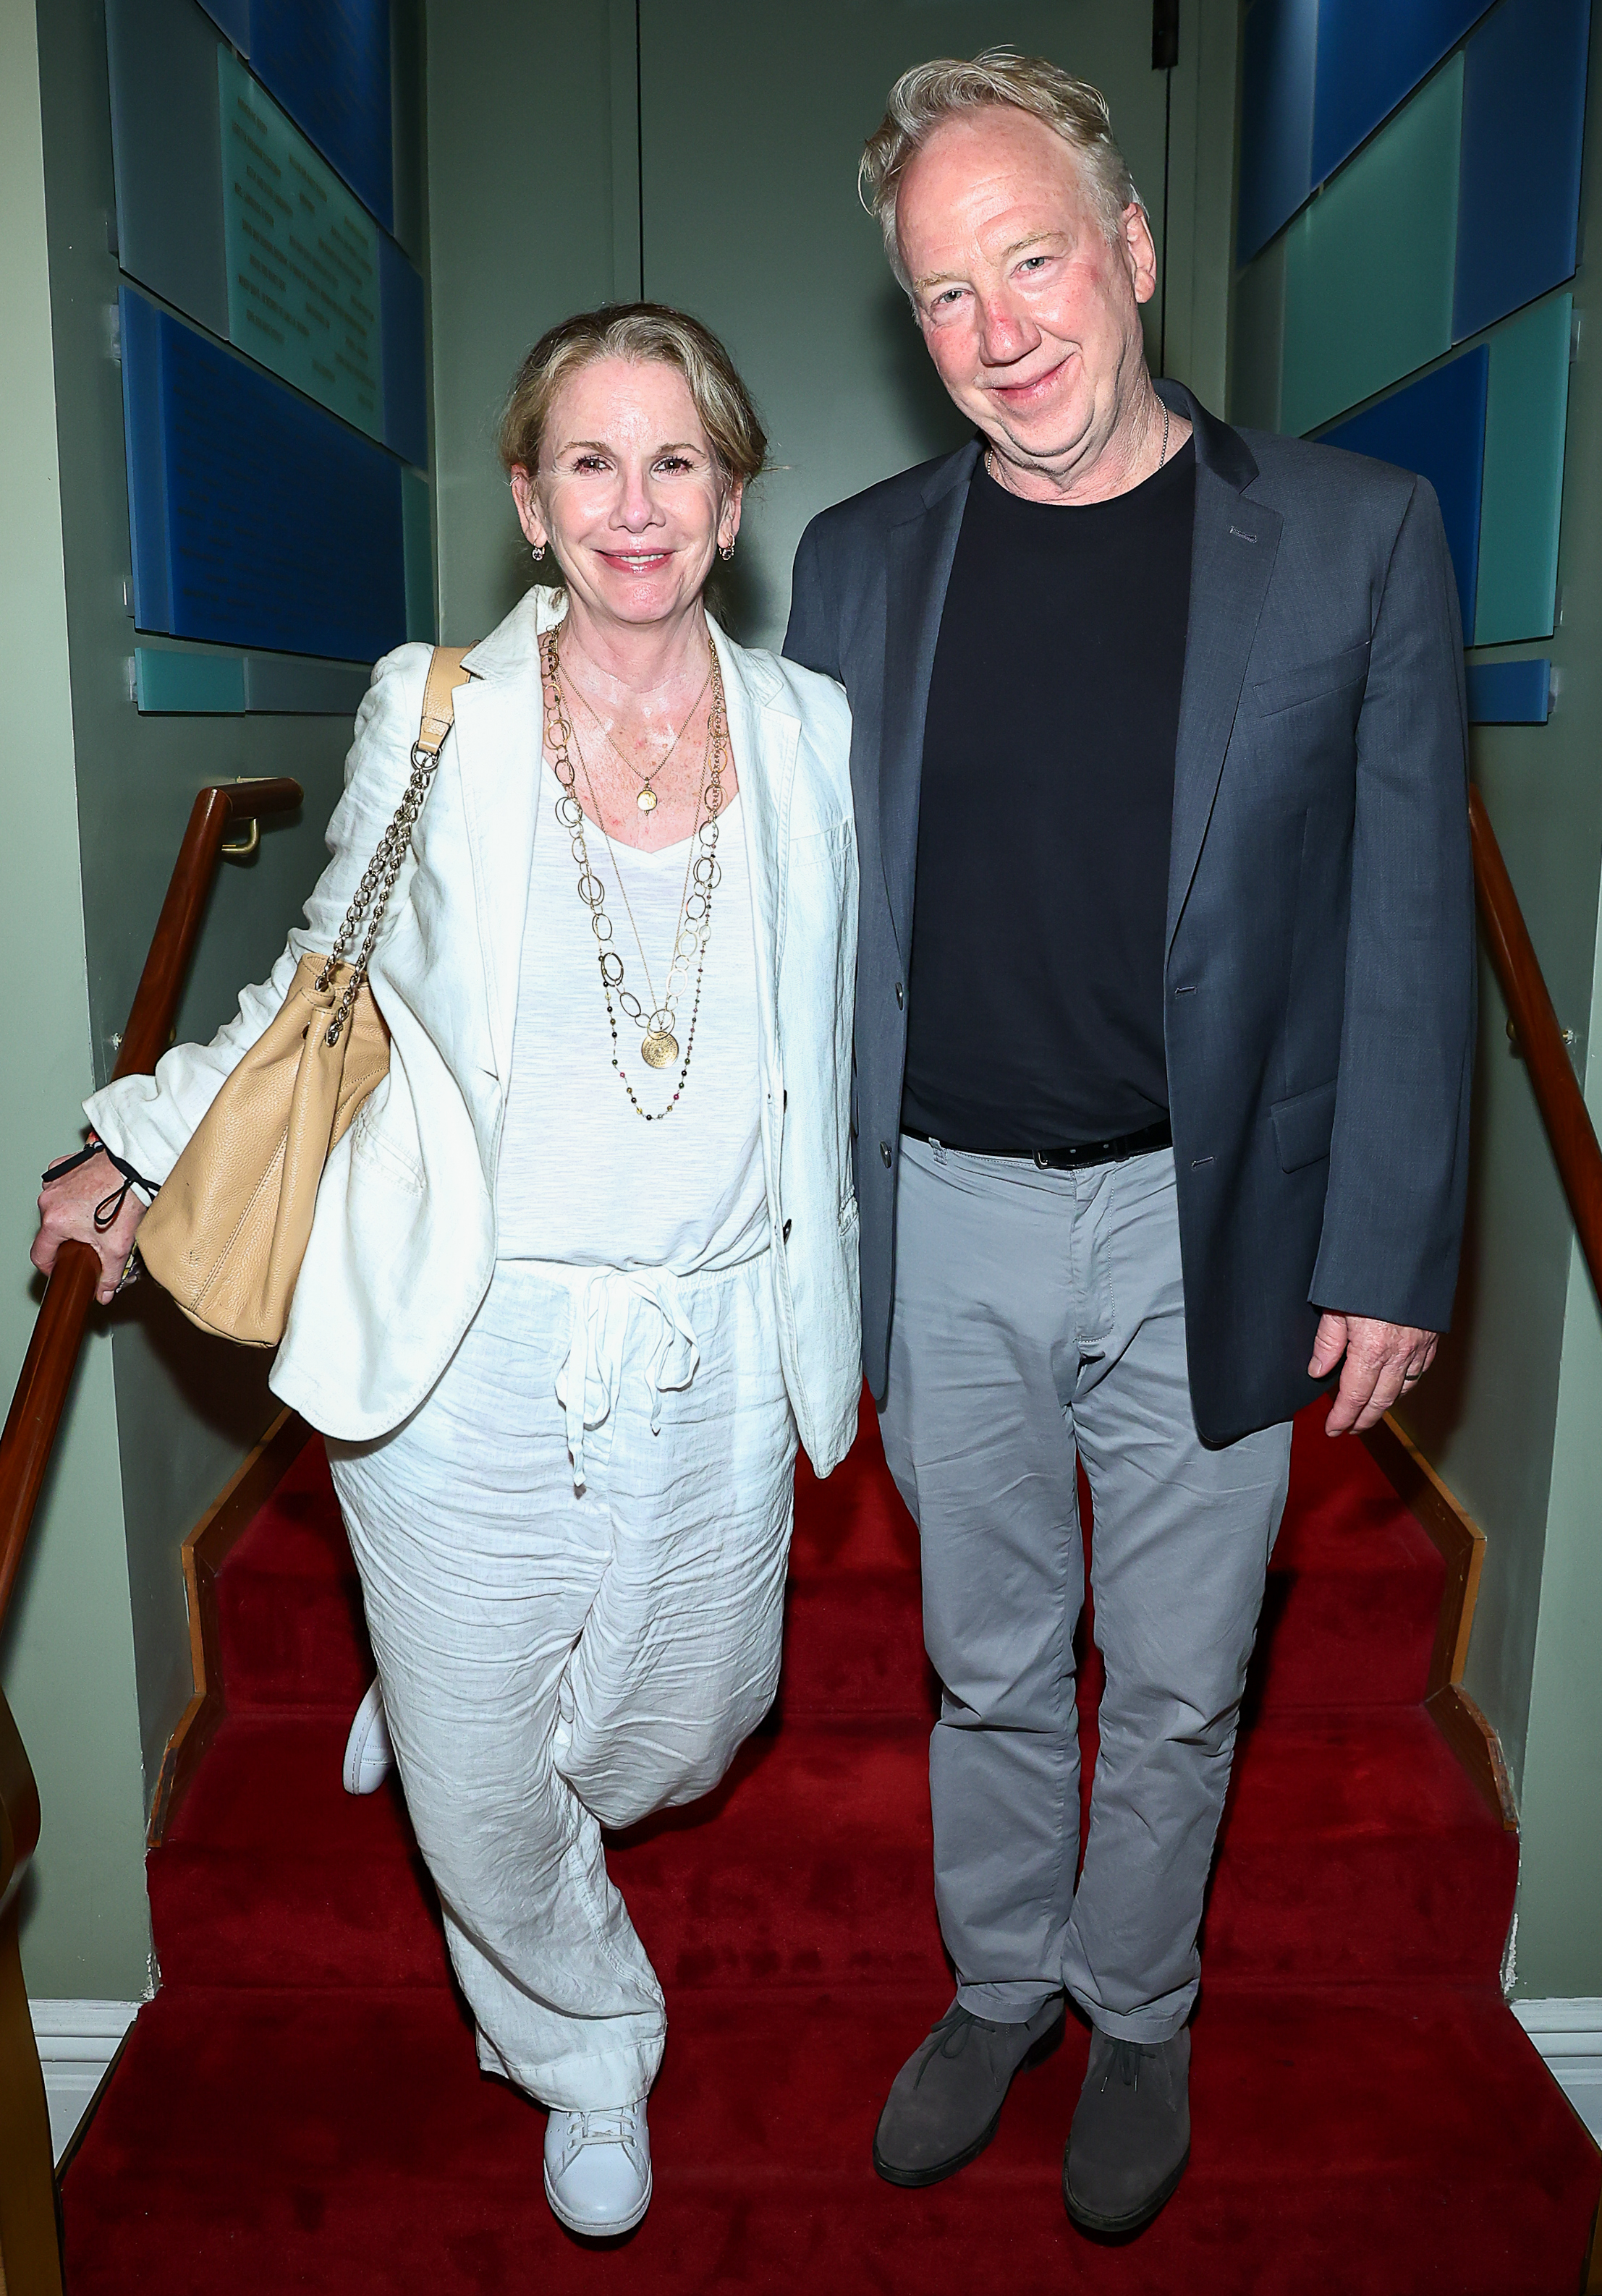 Melissa Gilbert and Timoth Busfield at the "The Butcher Boy" opening night in 2022 | Source: Getty Images